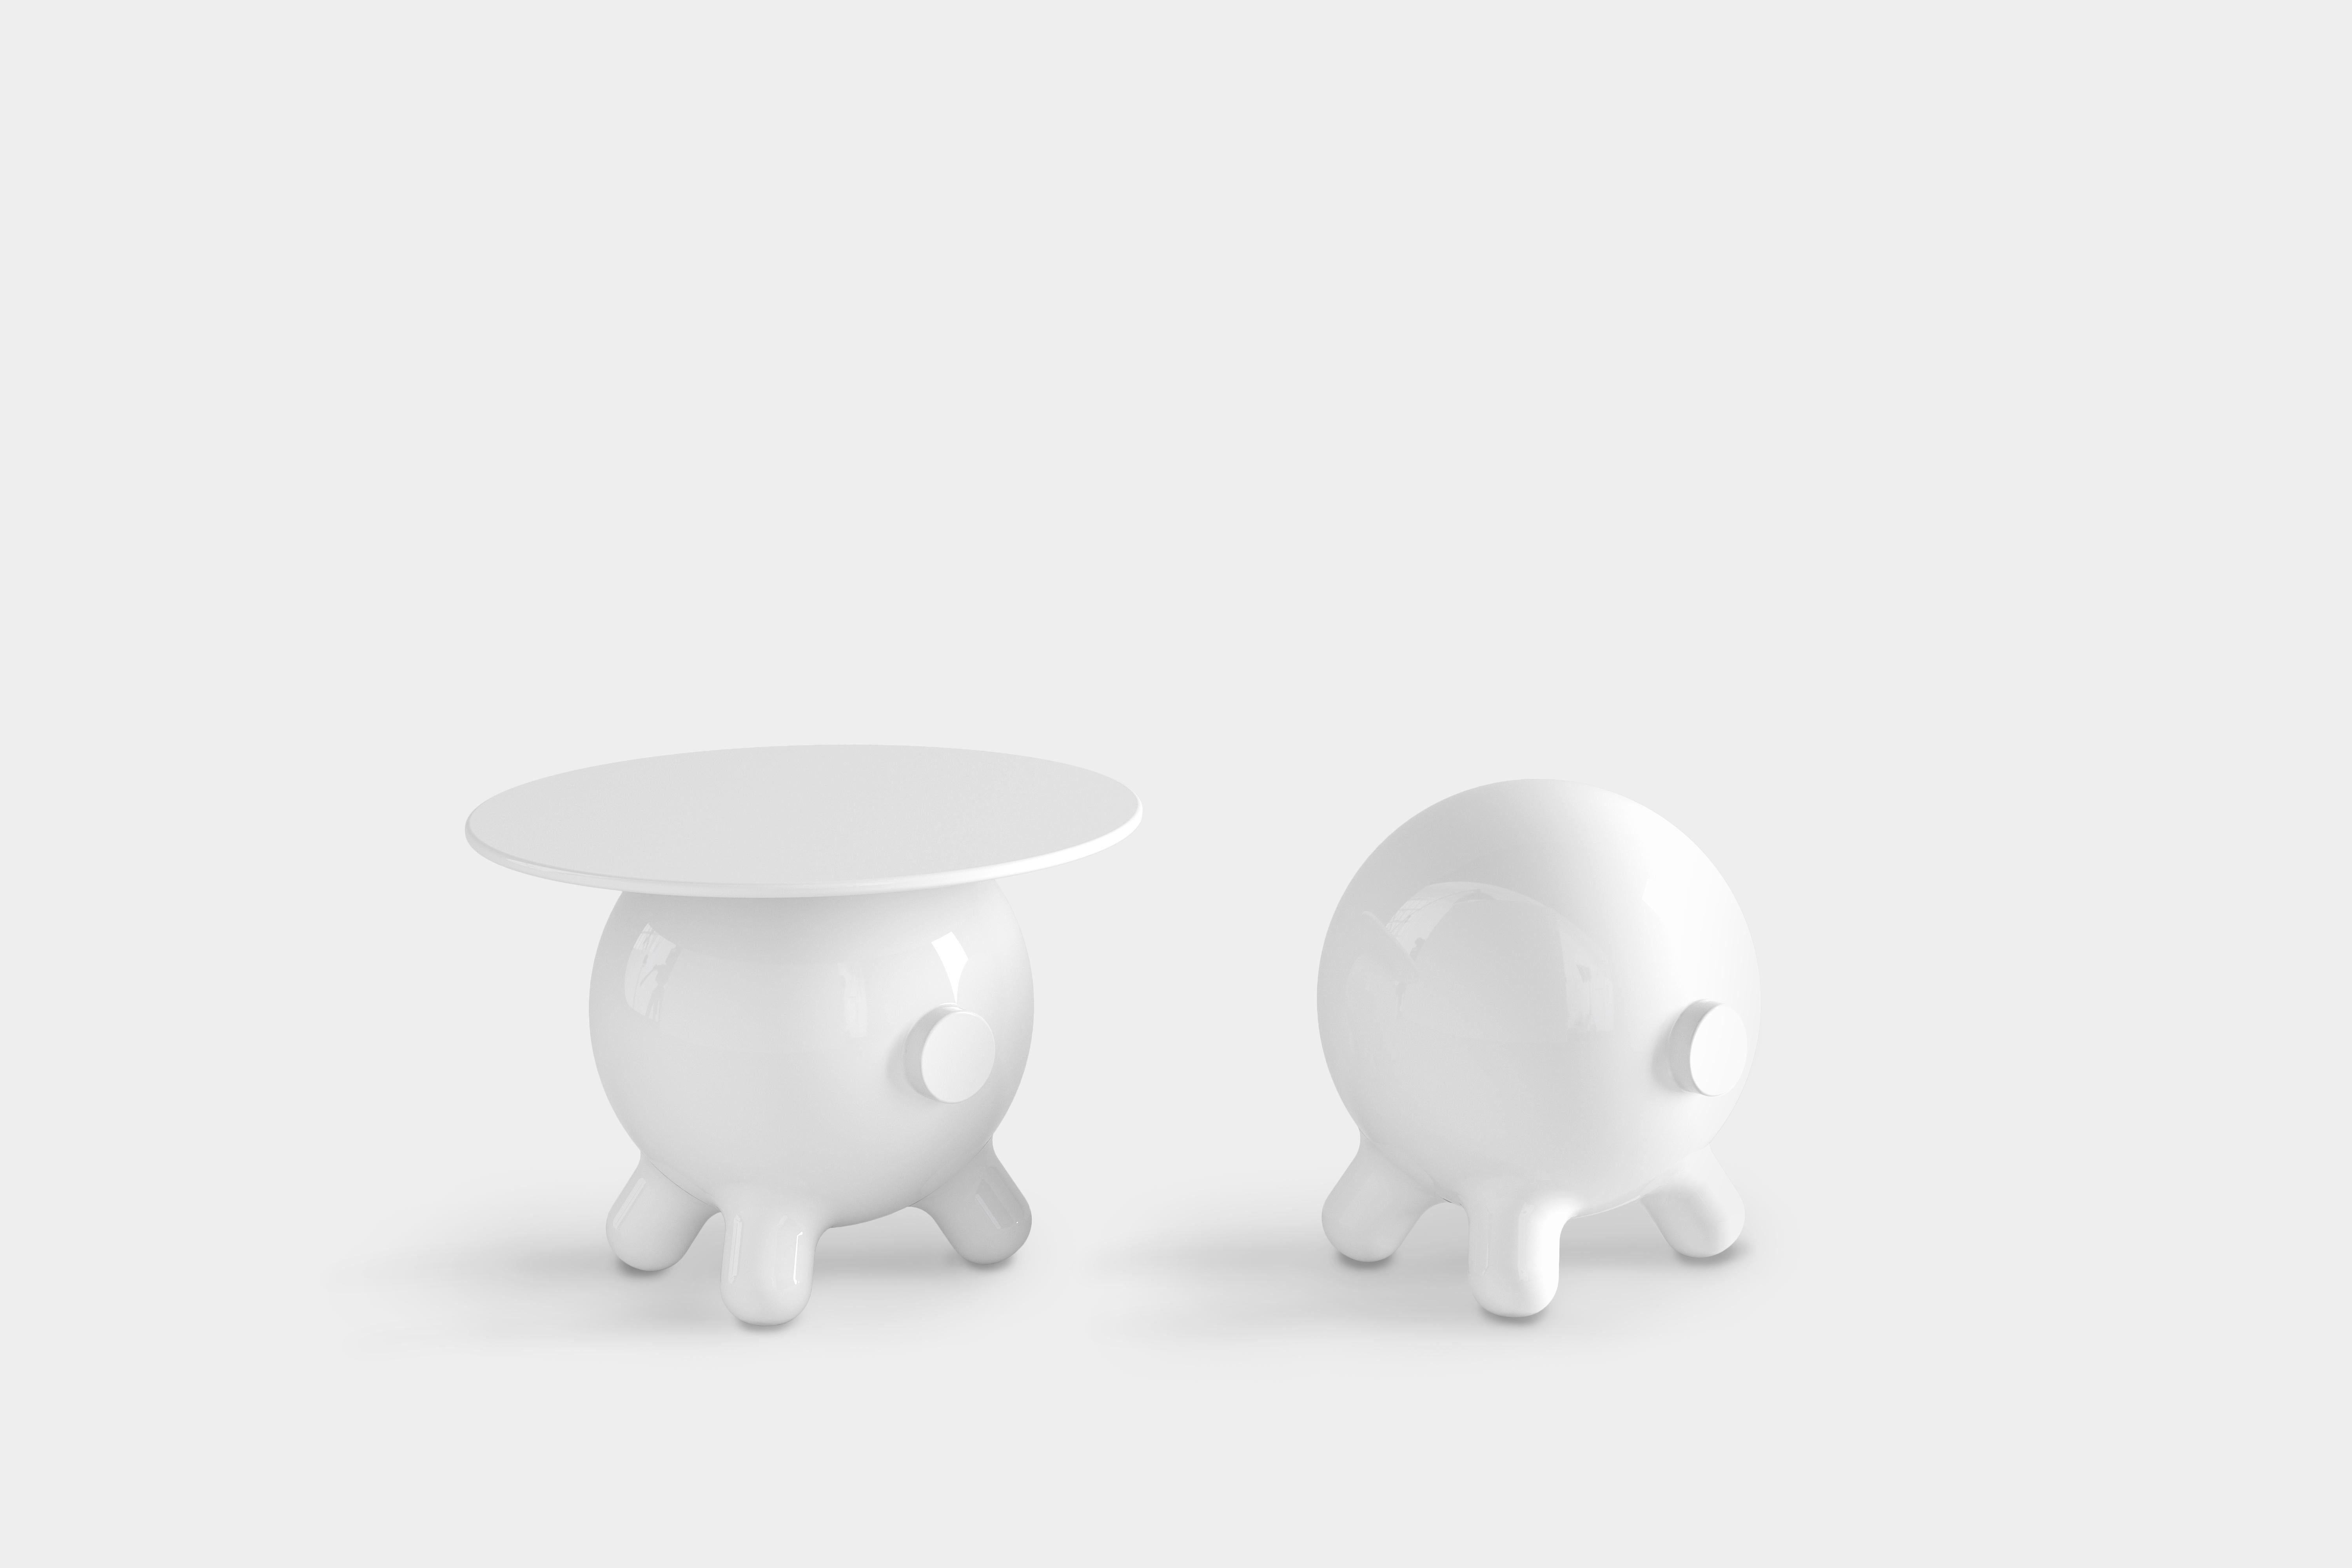 Contemporary White Decorative Stool and Playful Sculpture, Pogo by Joel Escalona For Sale